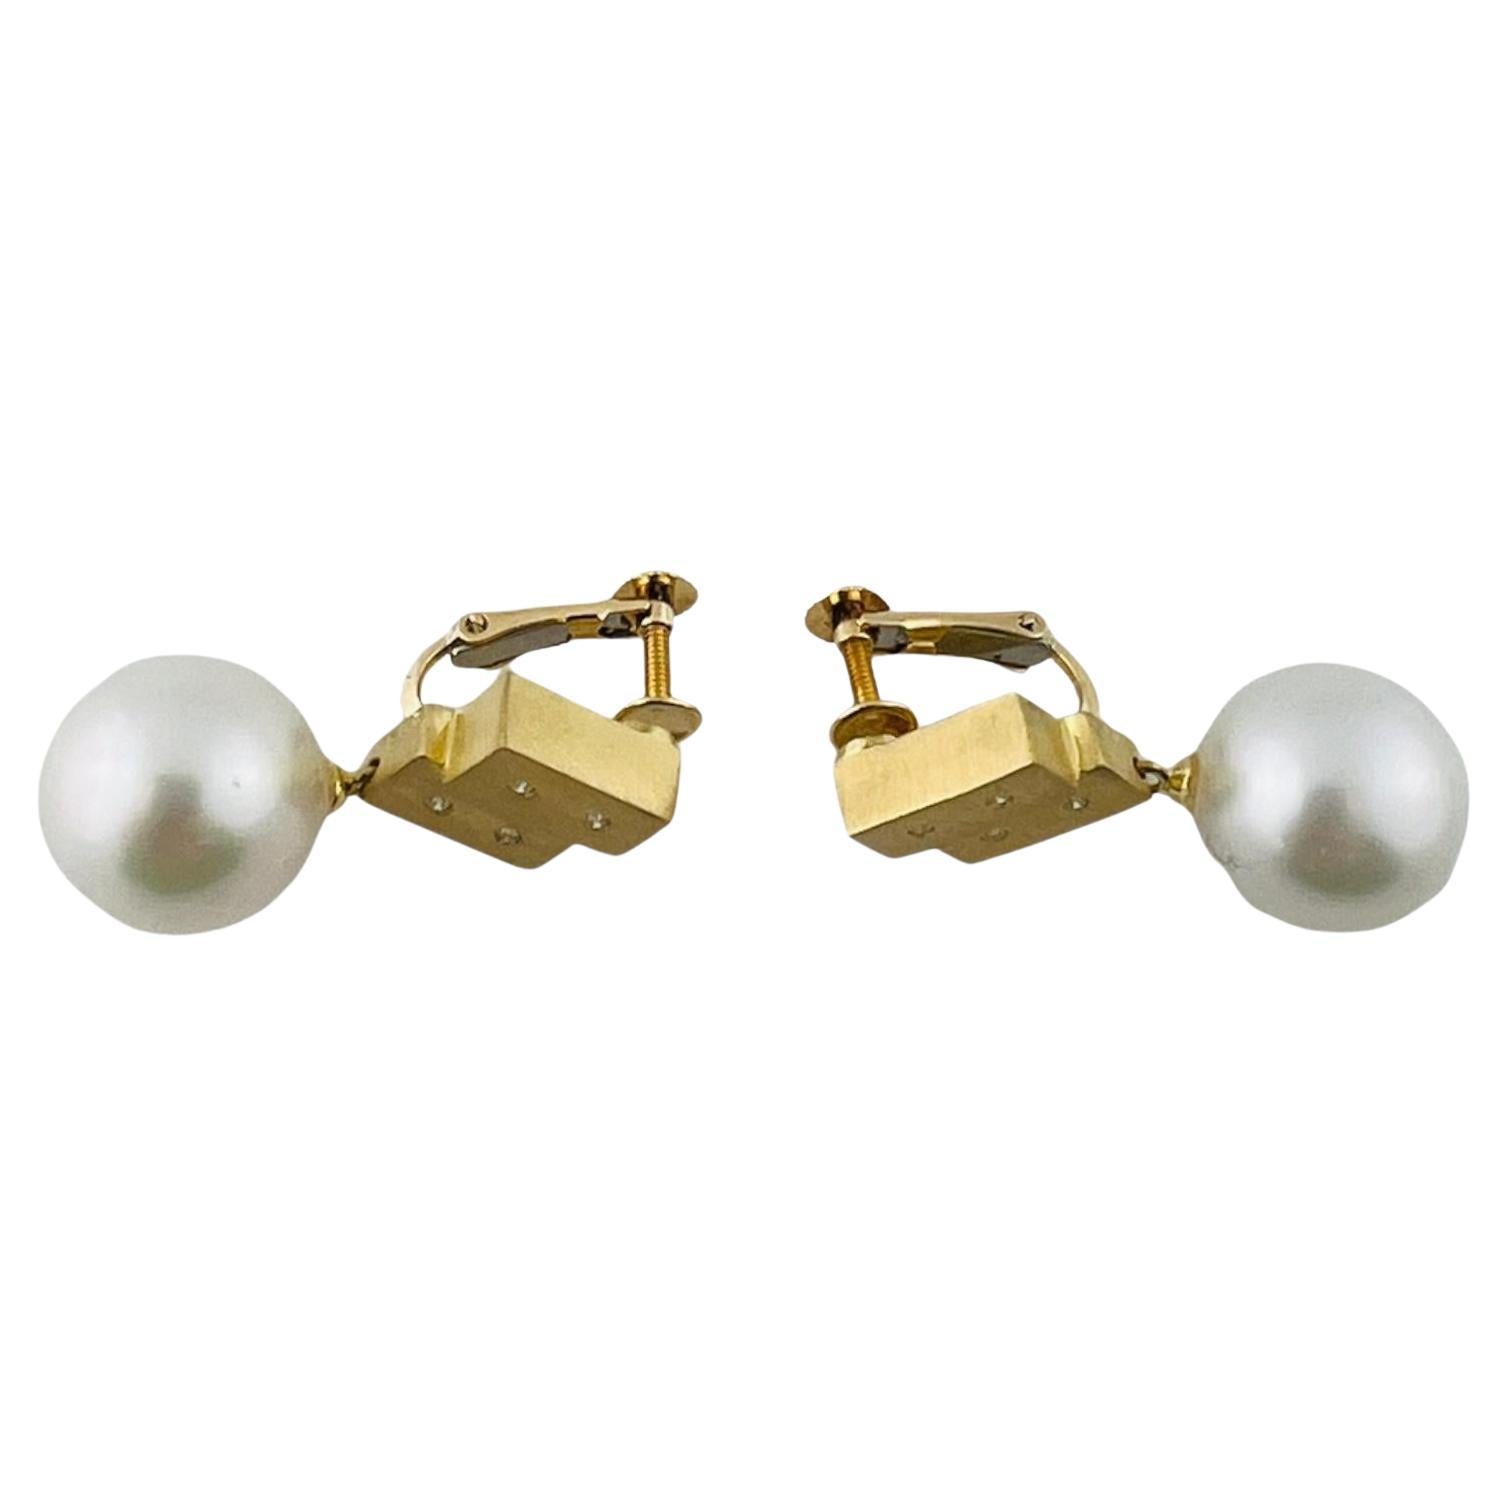 Vintage 18K Yellow Gold Diamond & Cultured Pearl Dangle Earrings

This set of beautiful screw on non-pierced earrings feature 2 dangling cultured south sea pearls and 8 sparkling round brilliant cut diamonds!

*Posts can be added upon